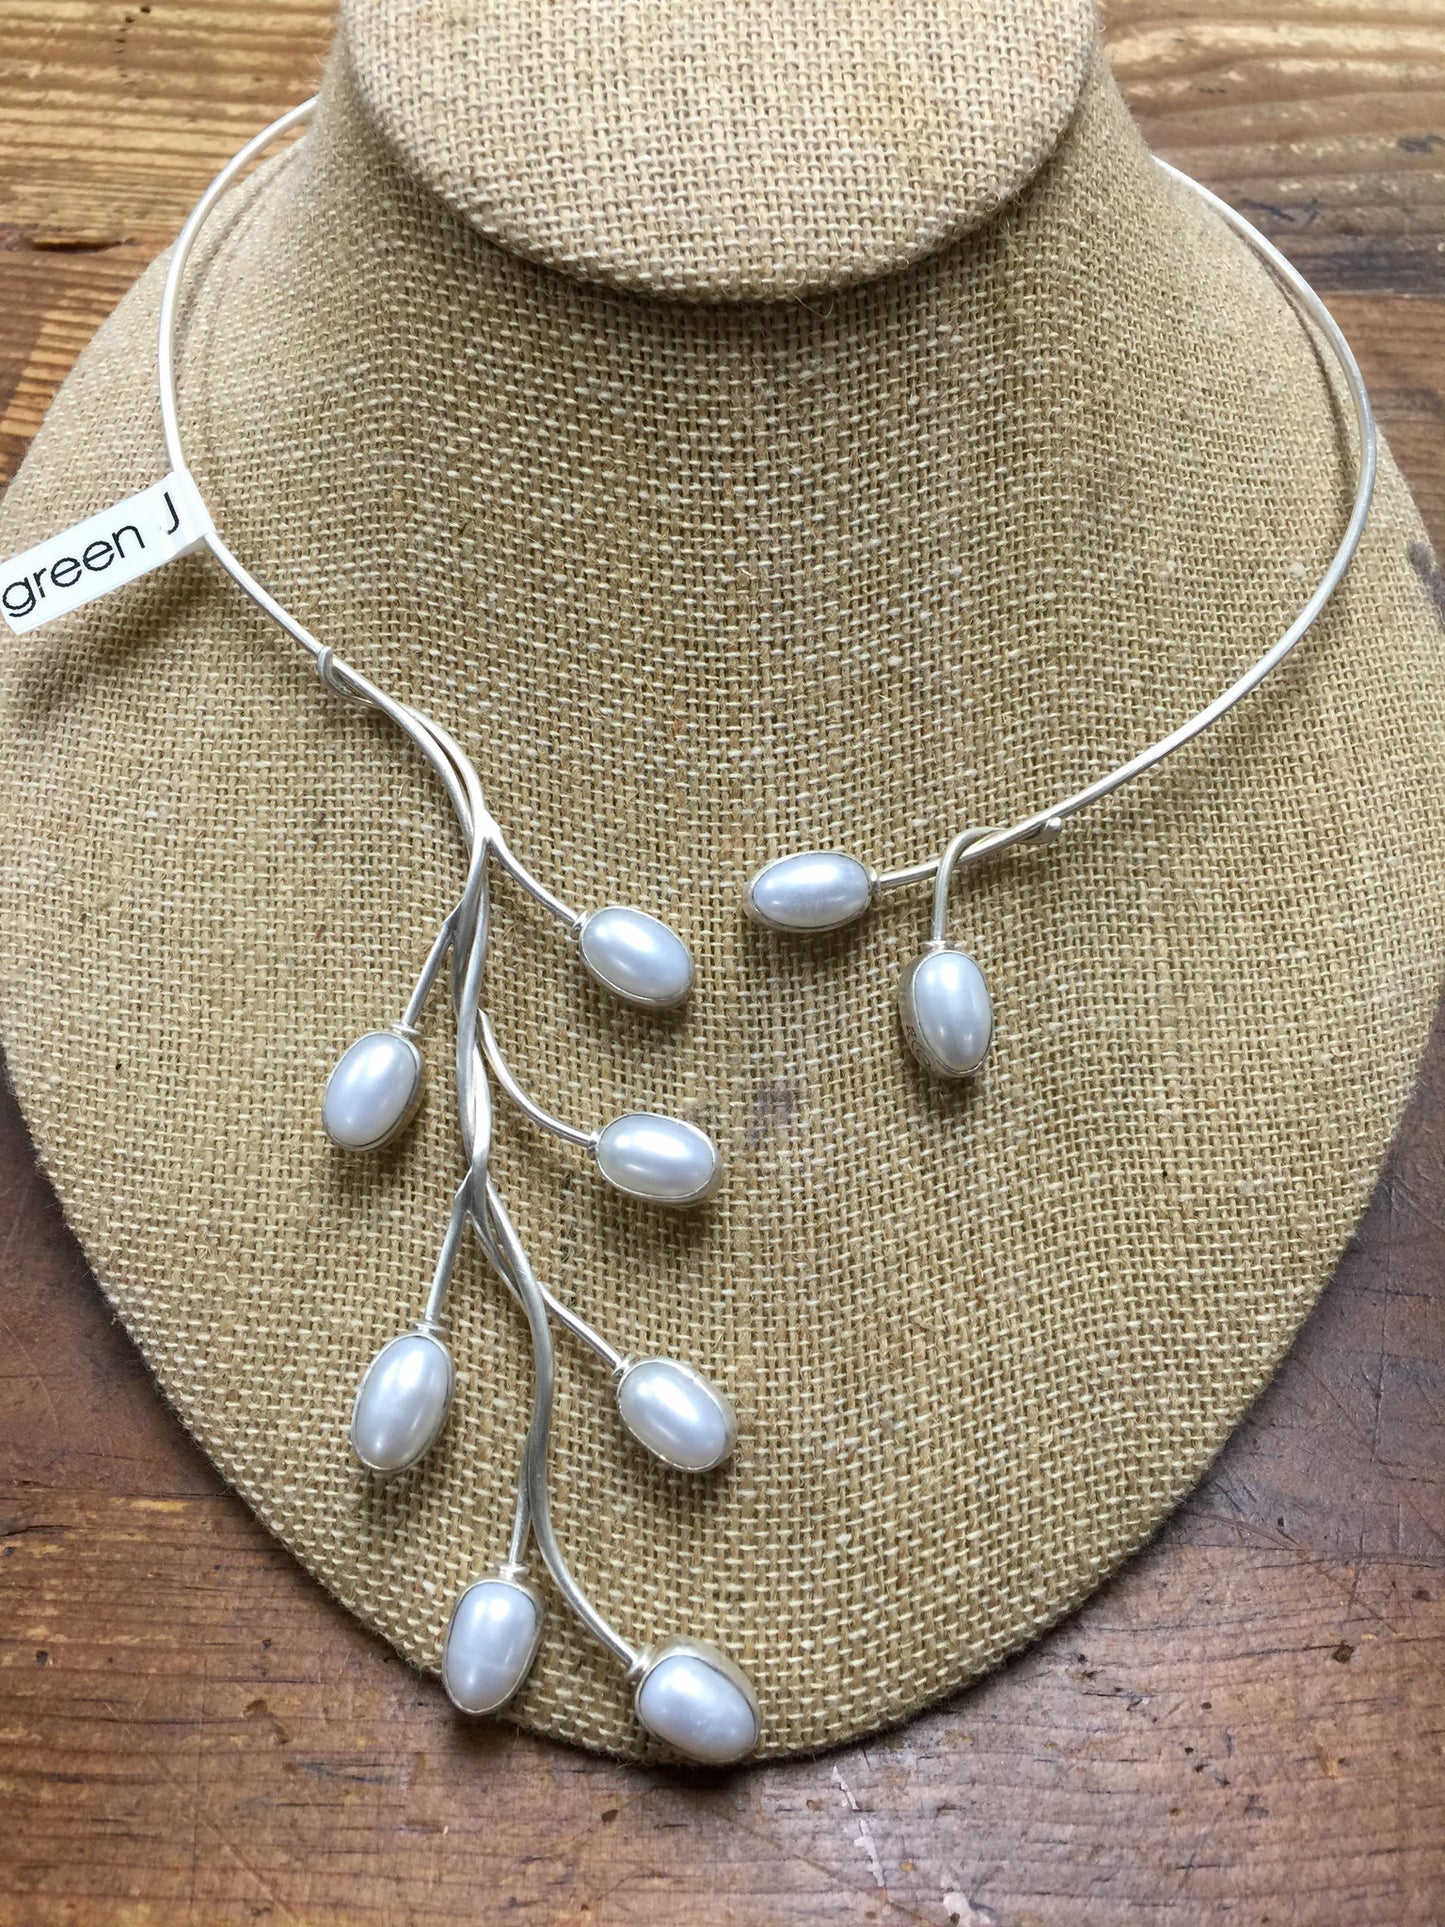 Brushed sterling silver and pearls necklace